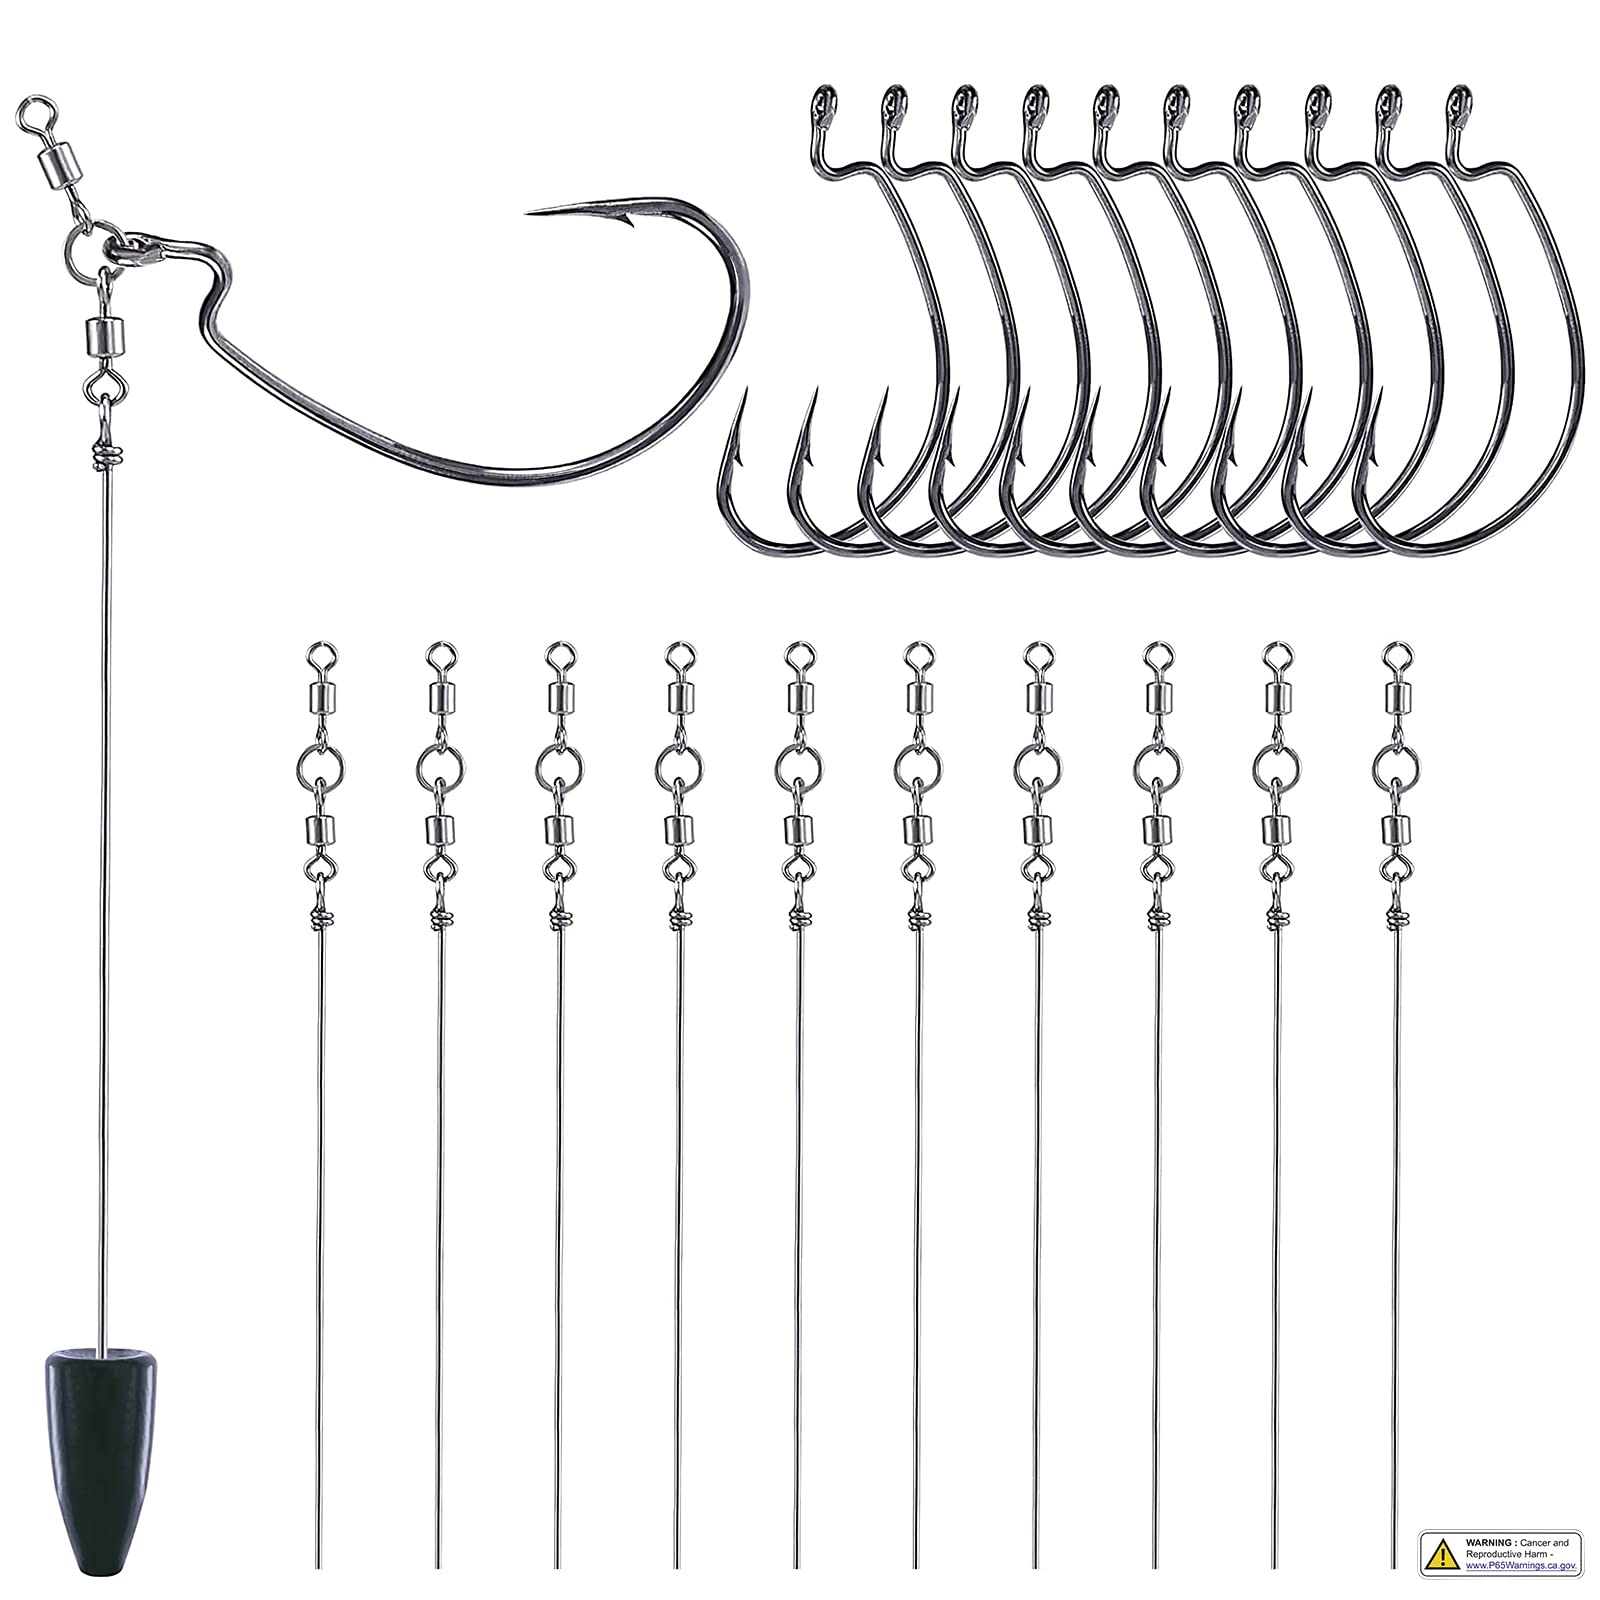 Fishing Accessories Kit With Fishing Swivels Hooks Sinker Weights